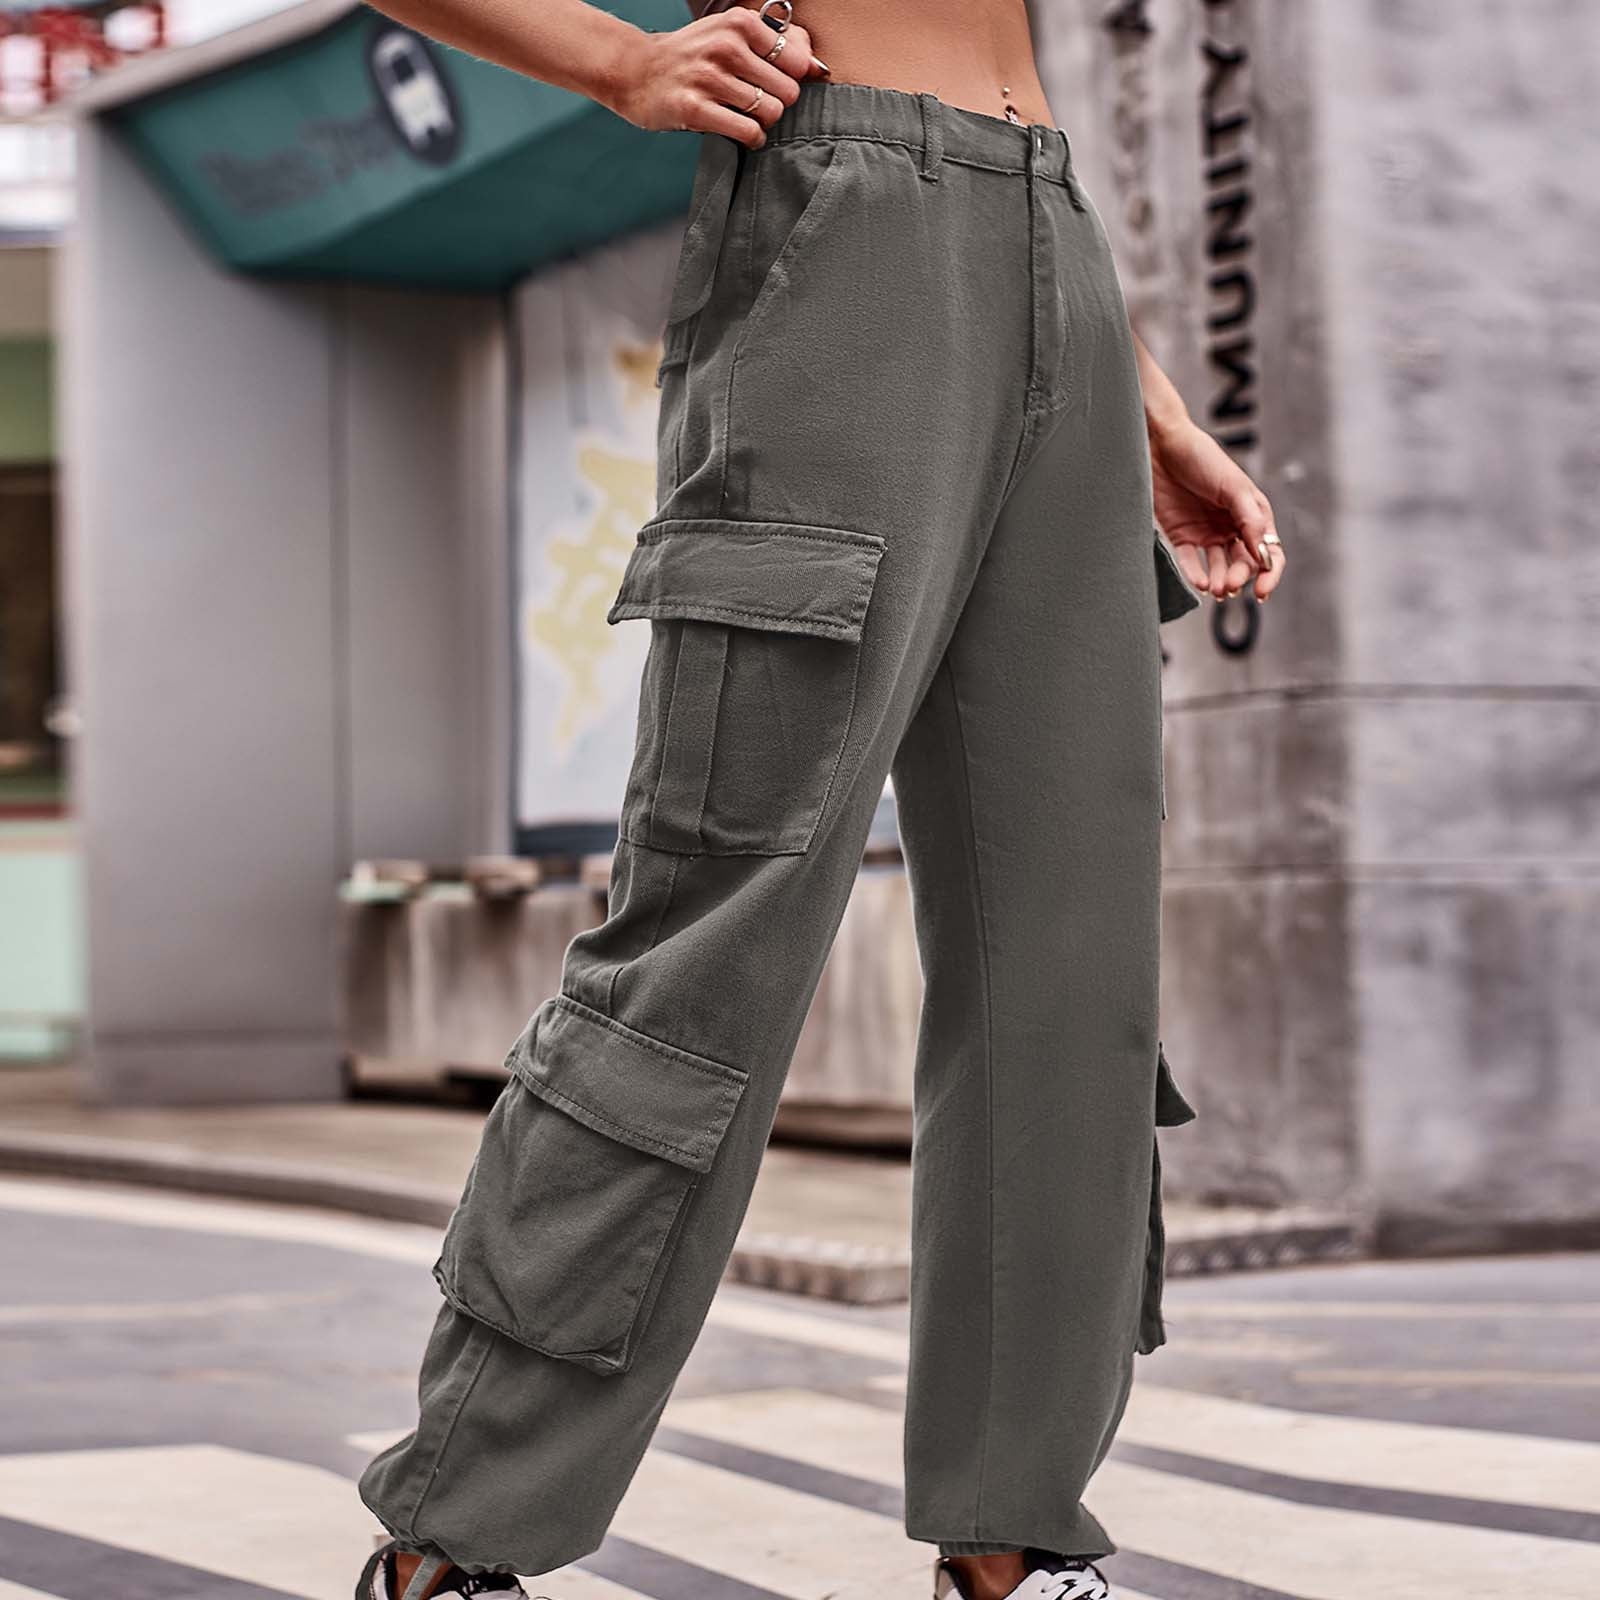 Calsunbaby Womens High Waist Cargo Pants Slim Fit Casual Jogger India | Ubuy